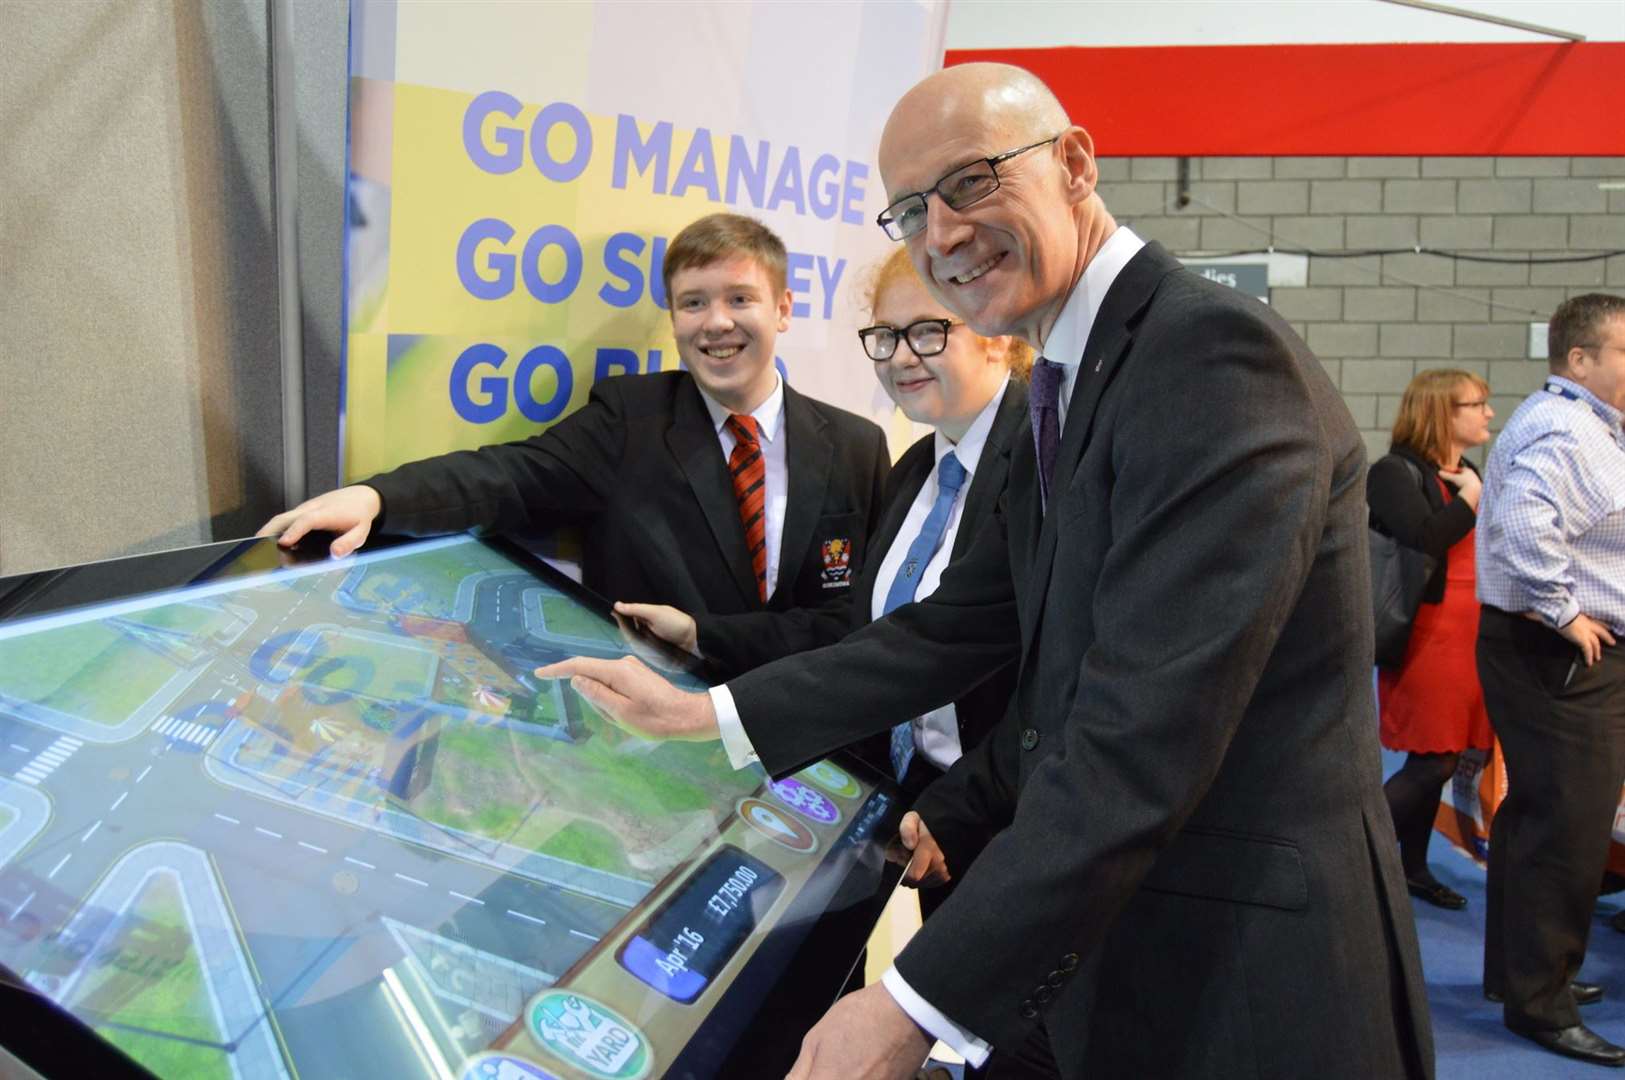 Deputy First Minister John Swinney attended Skills Scotland last year, which will be holding an event in Aberdeen next month.